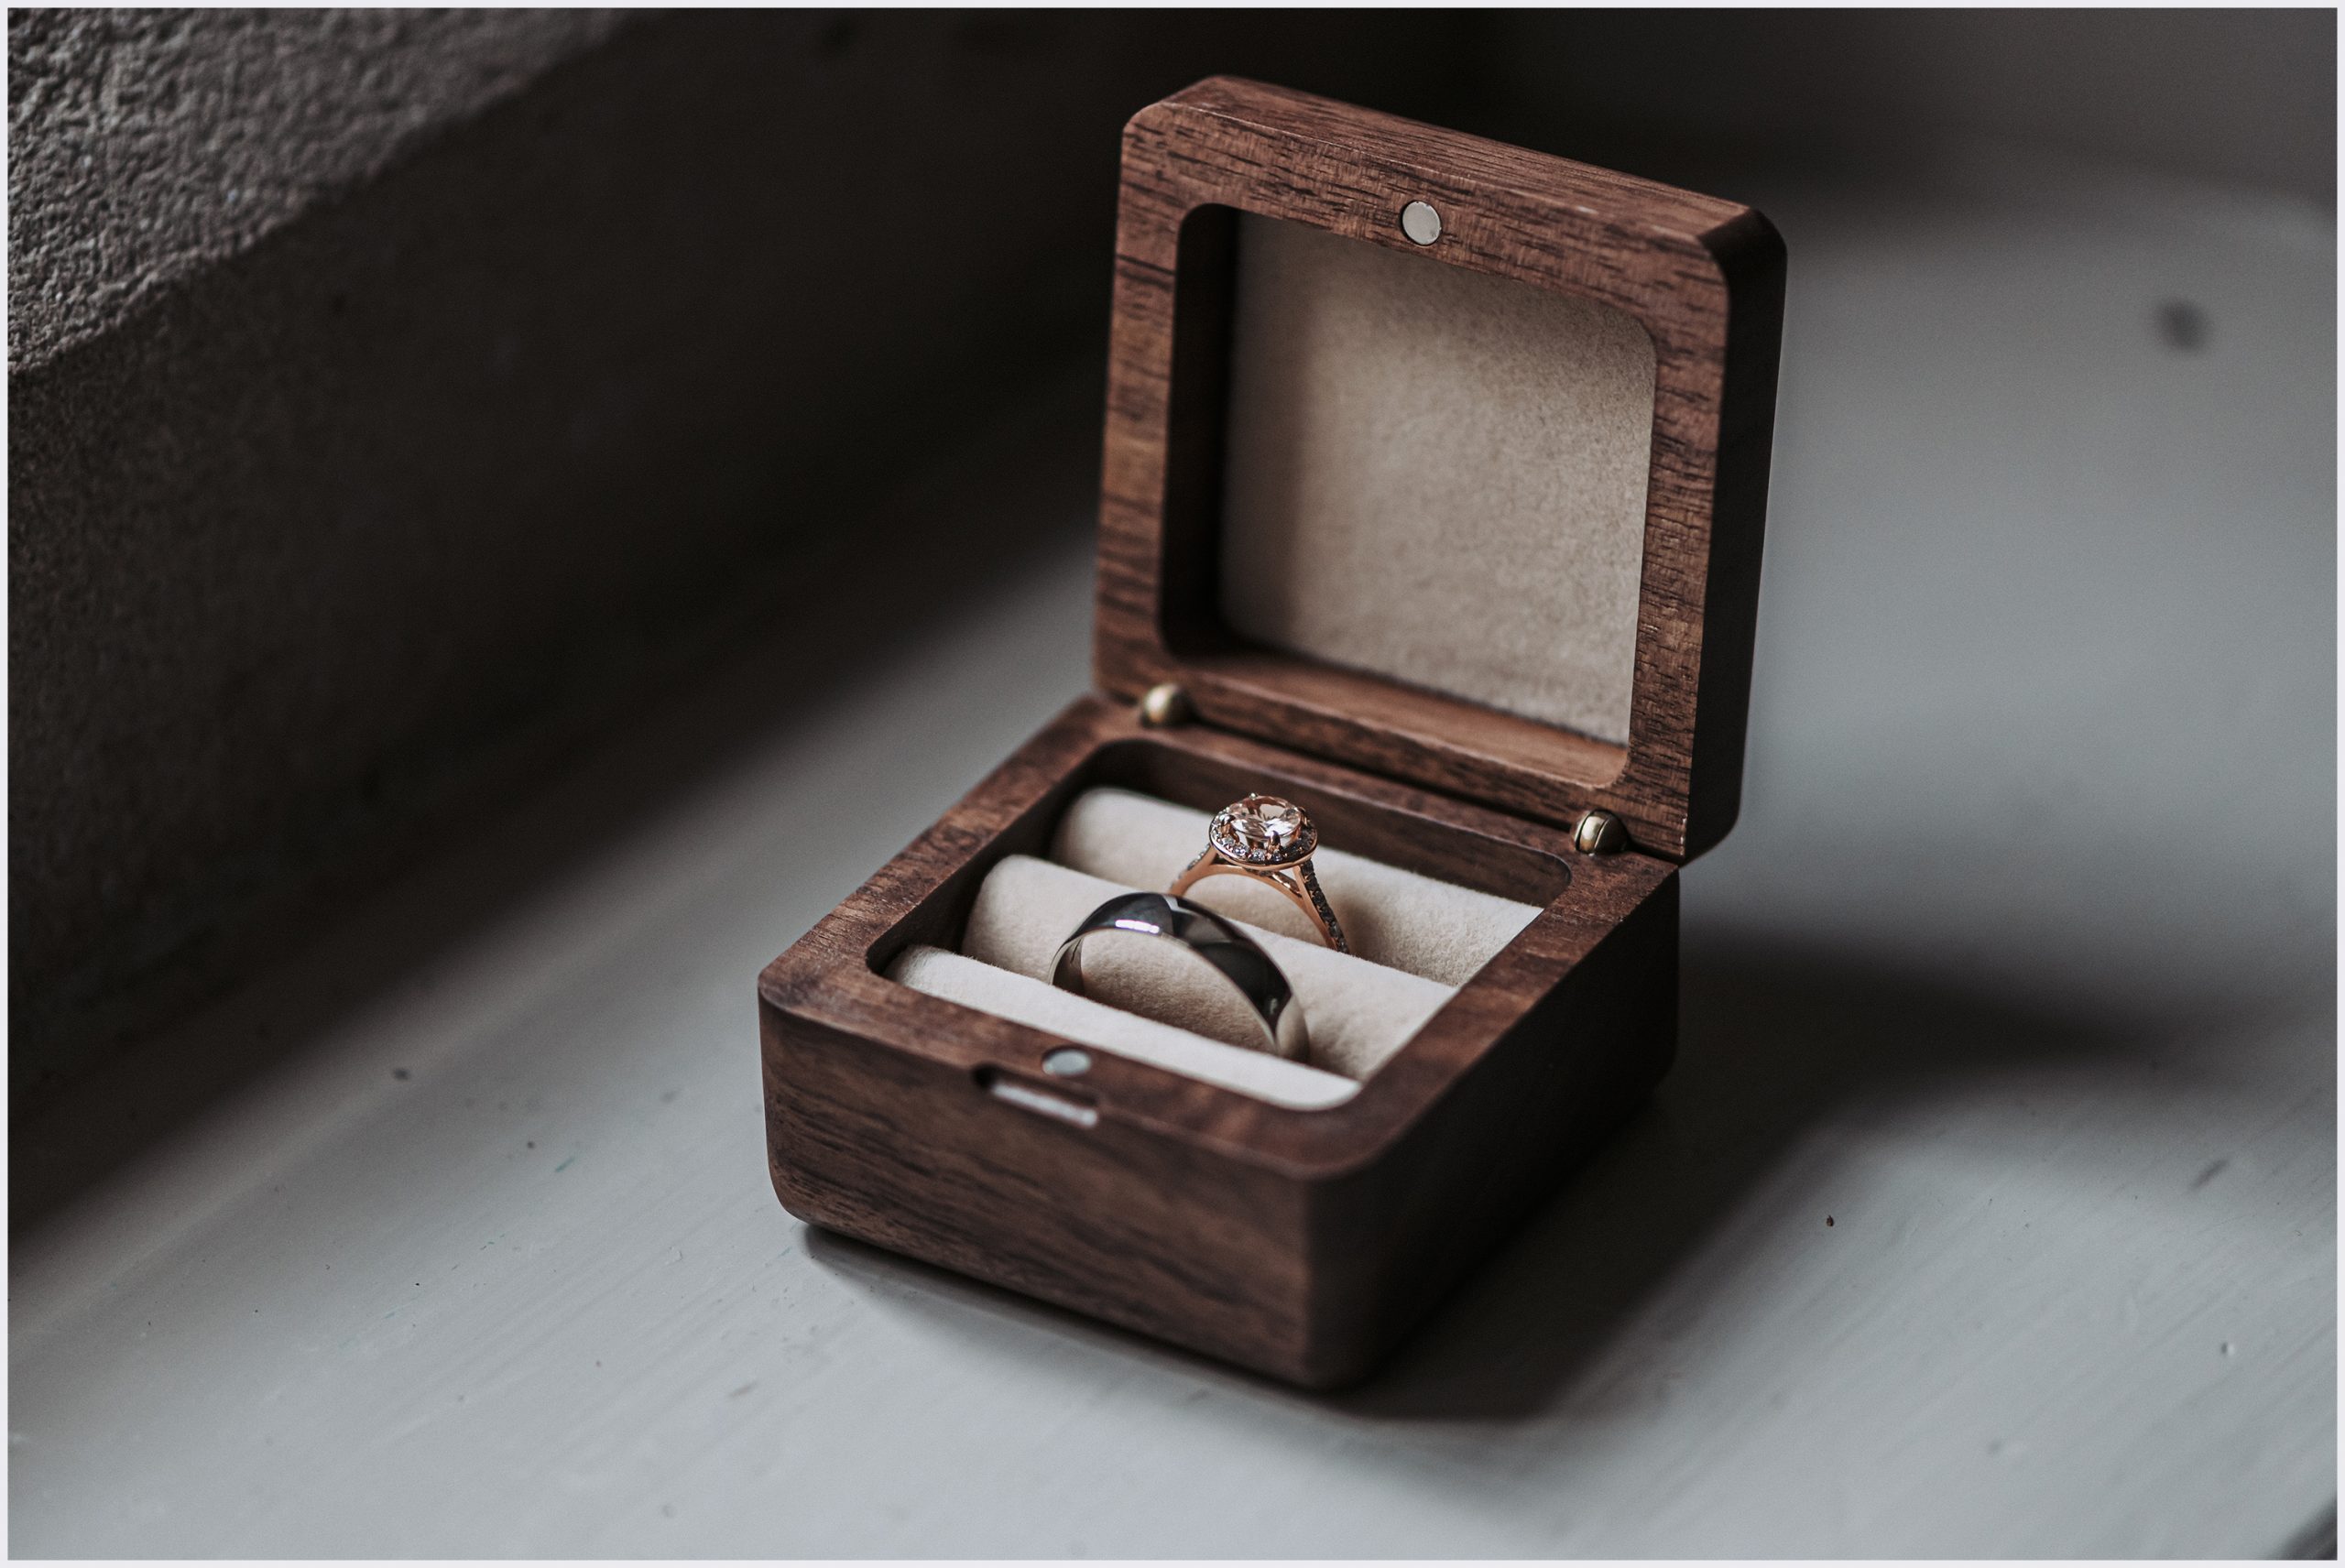 An open beautiful wooden ring box open displaying a bride and groom's wedding rings.